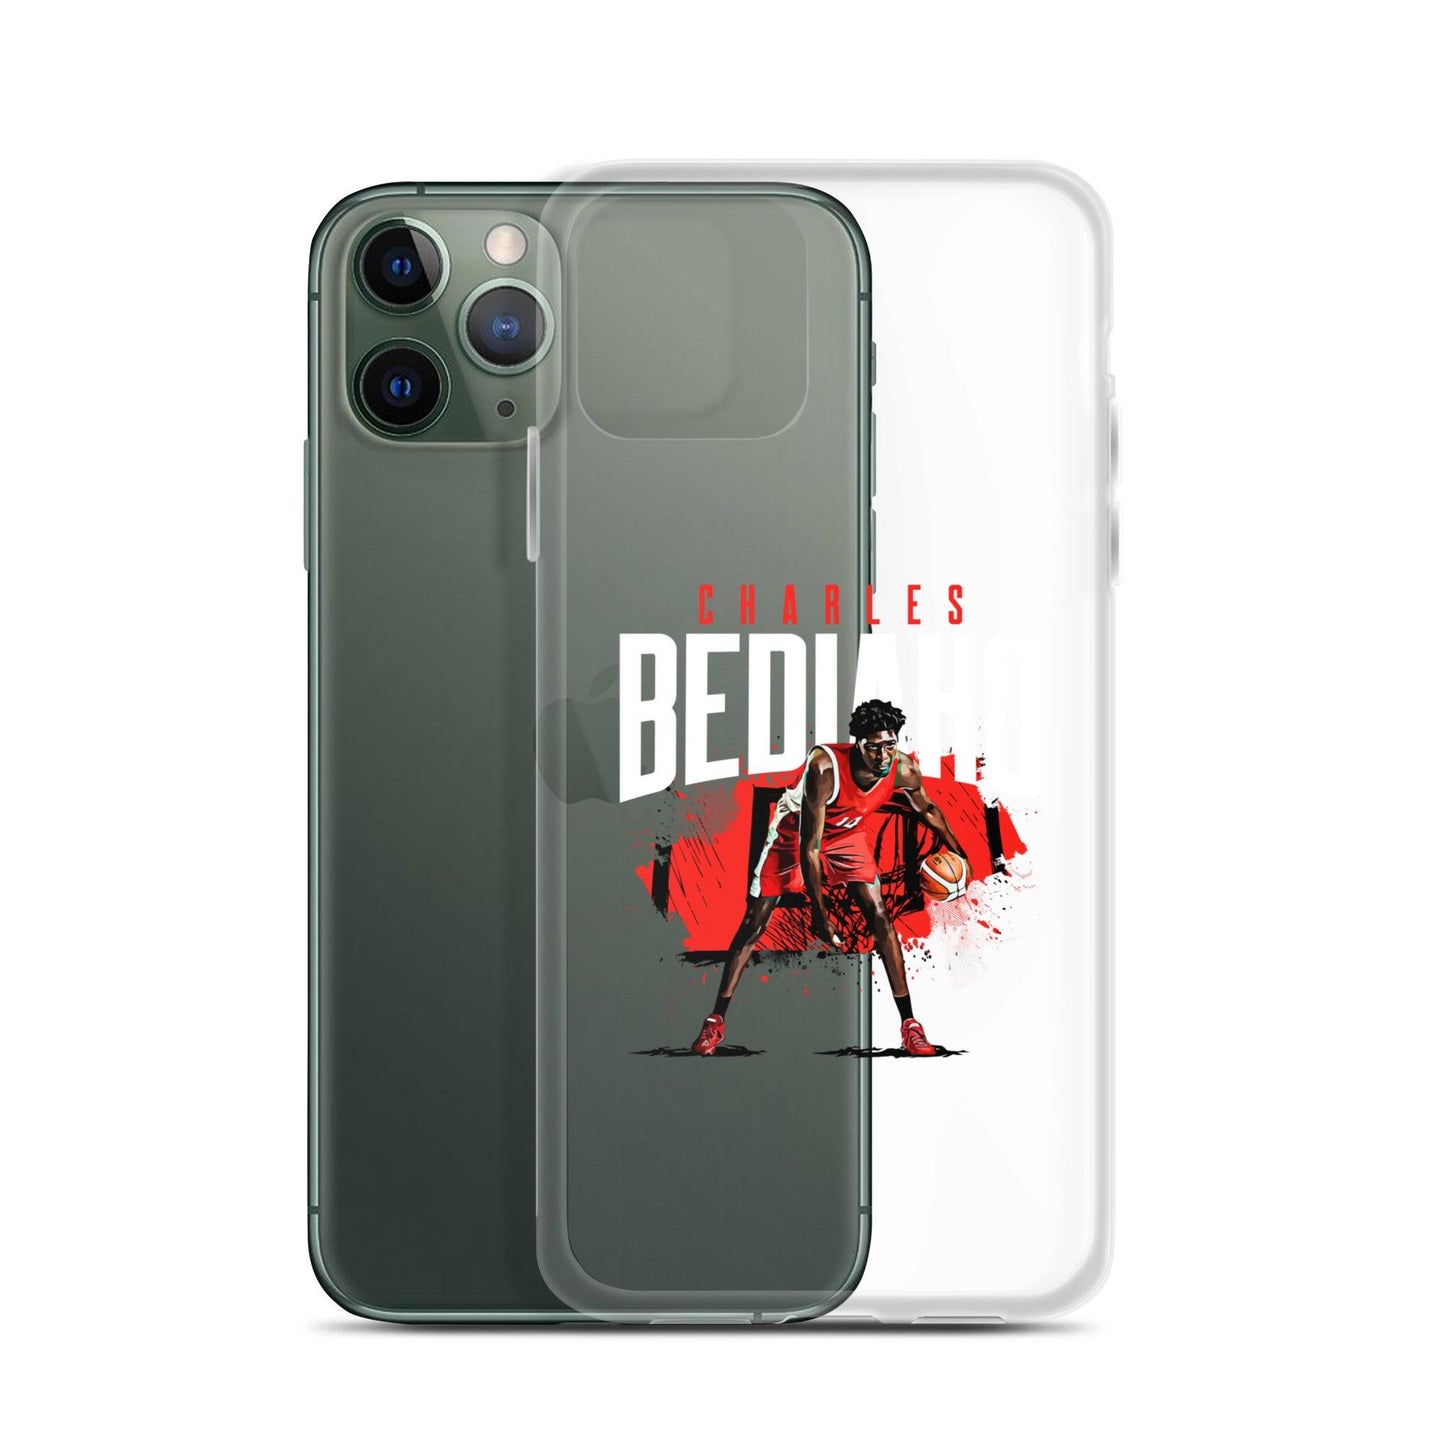 Charles Bediako "Crossover" iPhone Case - Fan Arch